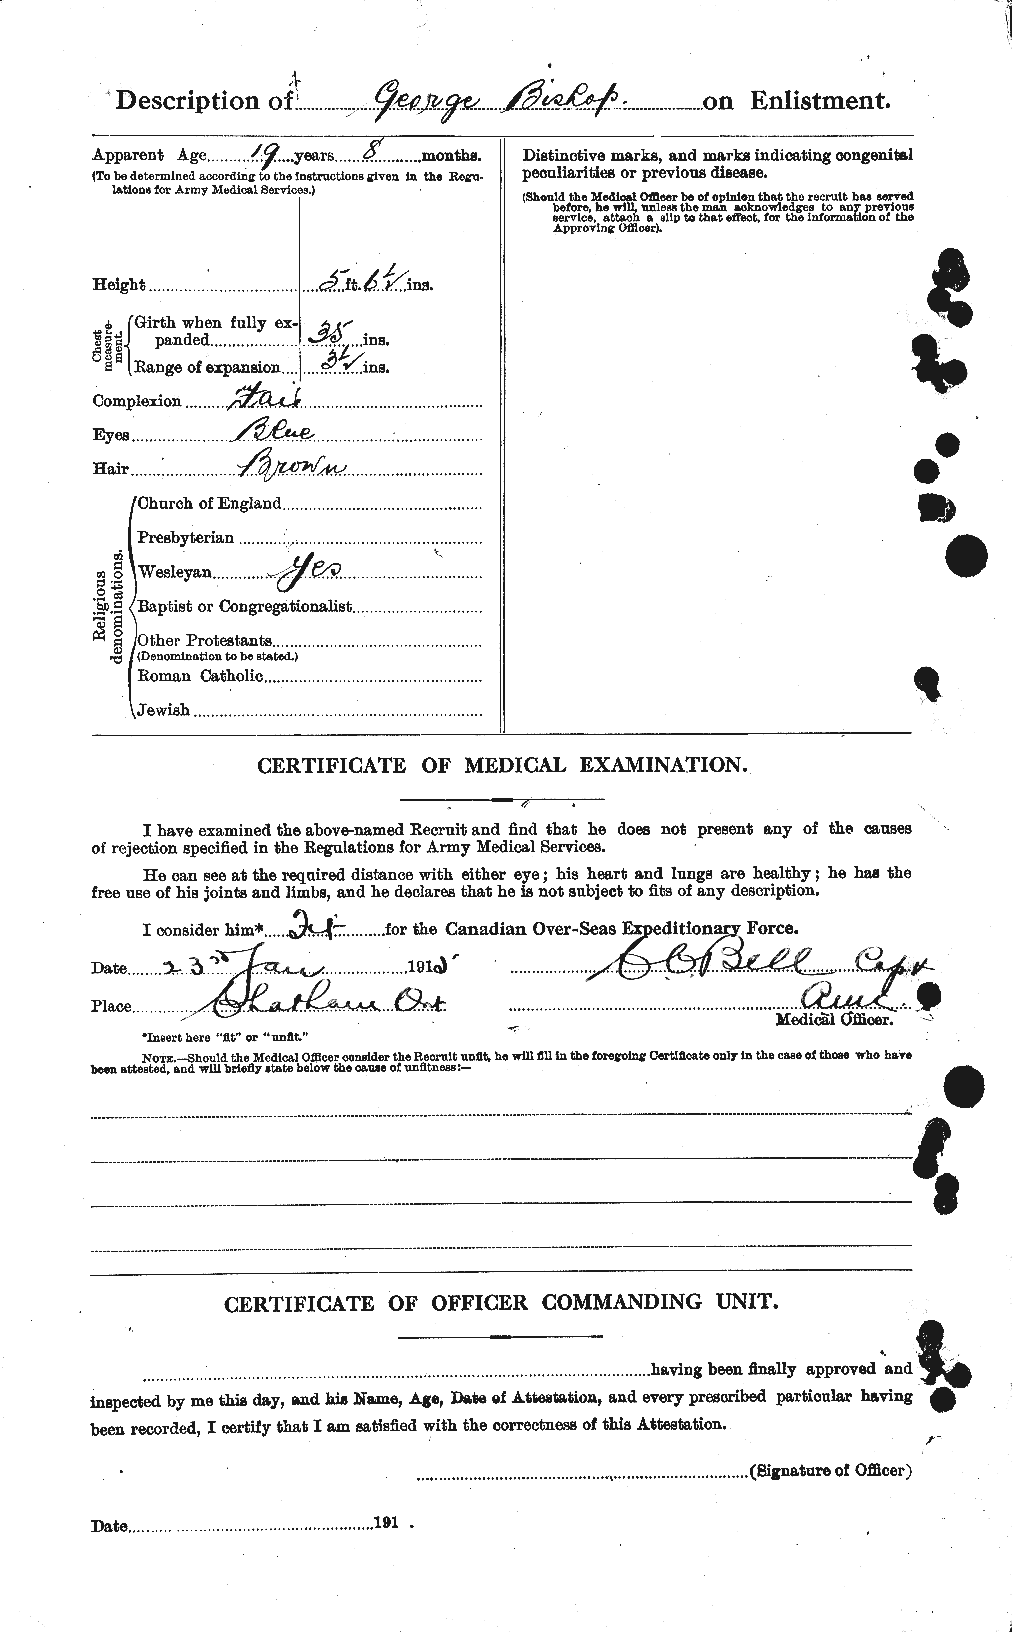 Personnel Records of the First World War - CEF 244274b